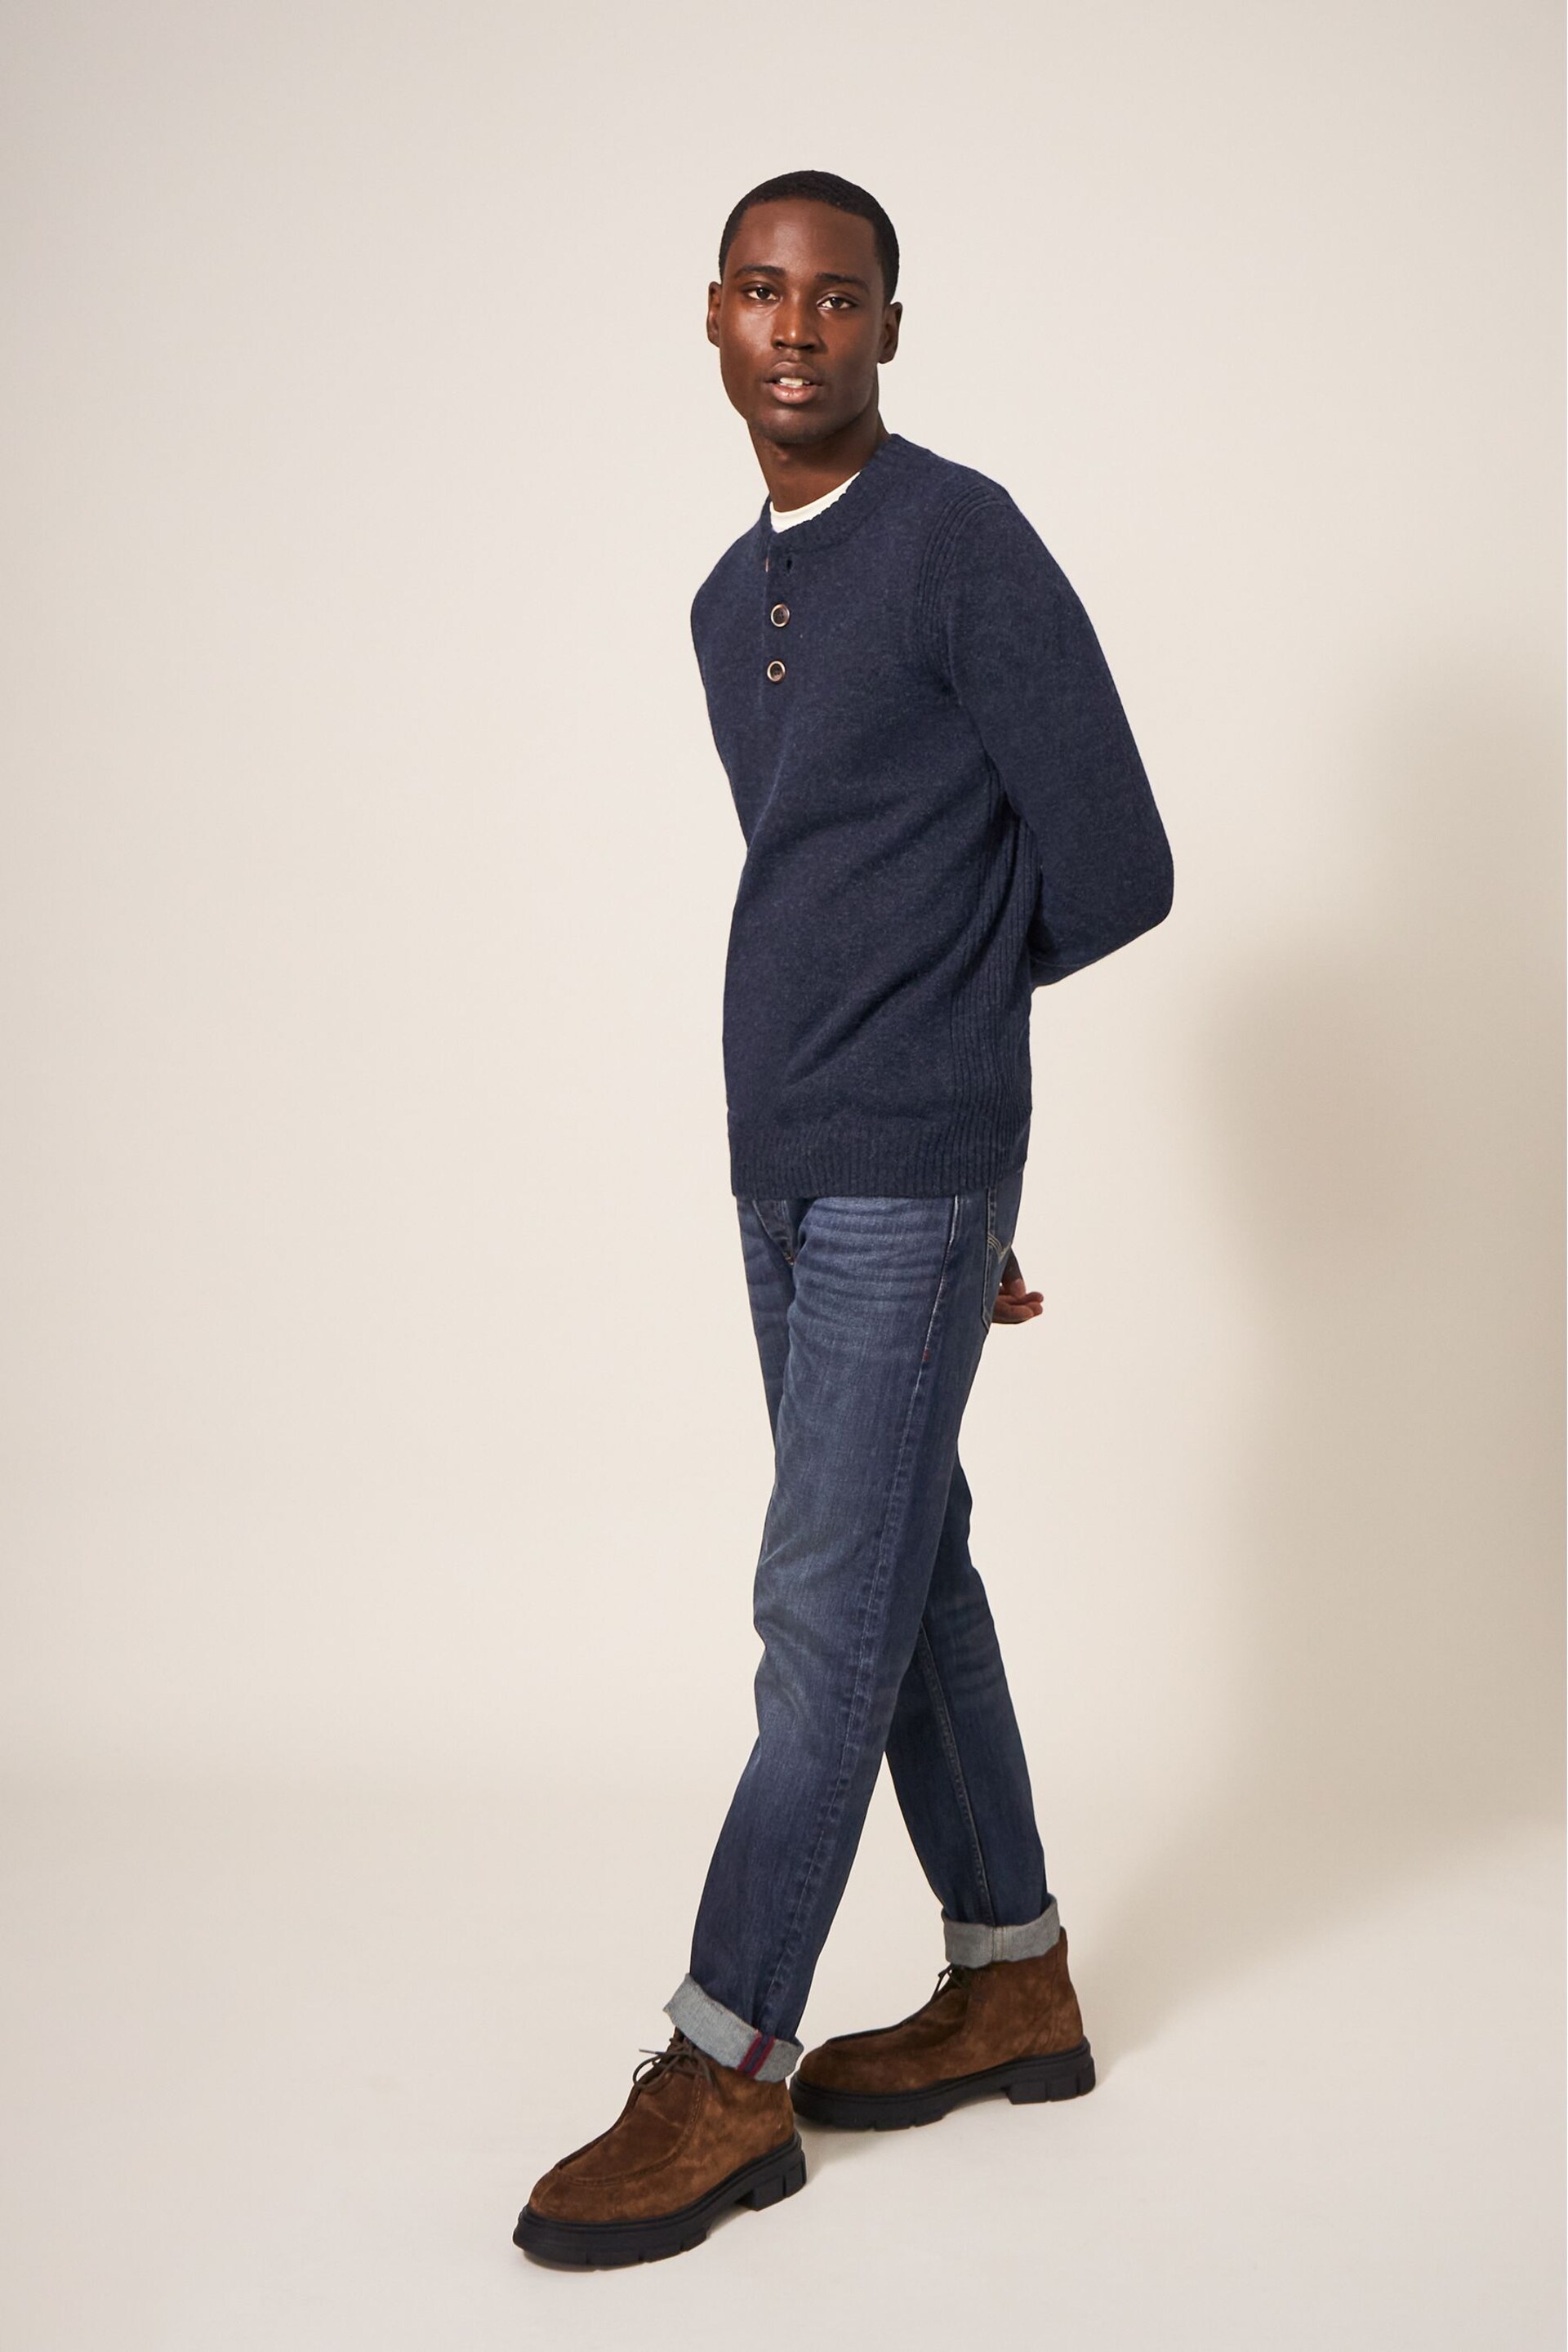 White Stuff Blue Lambswool Henley Jumper - Image 3 of 6